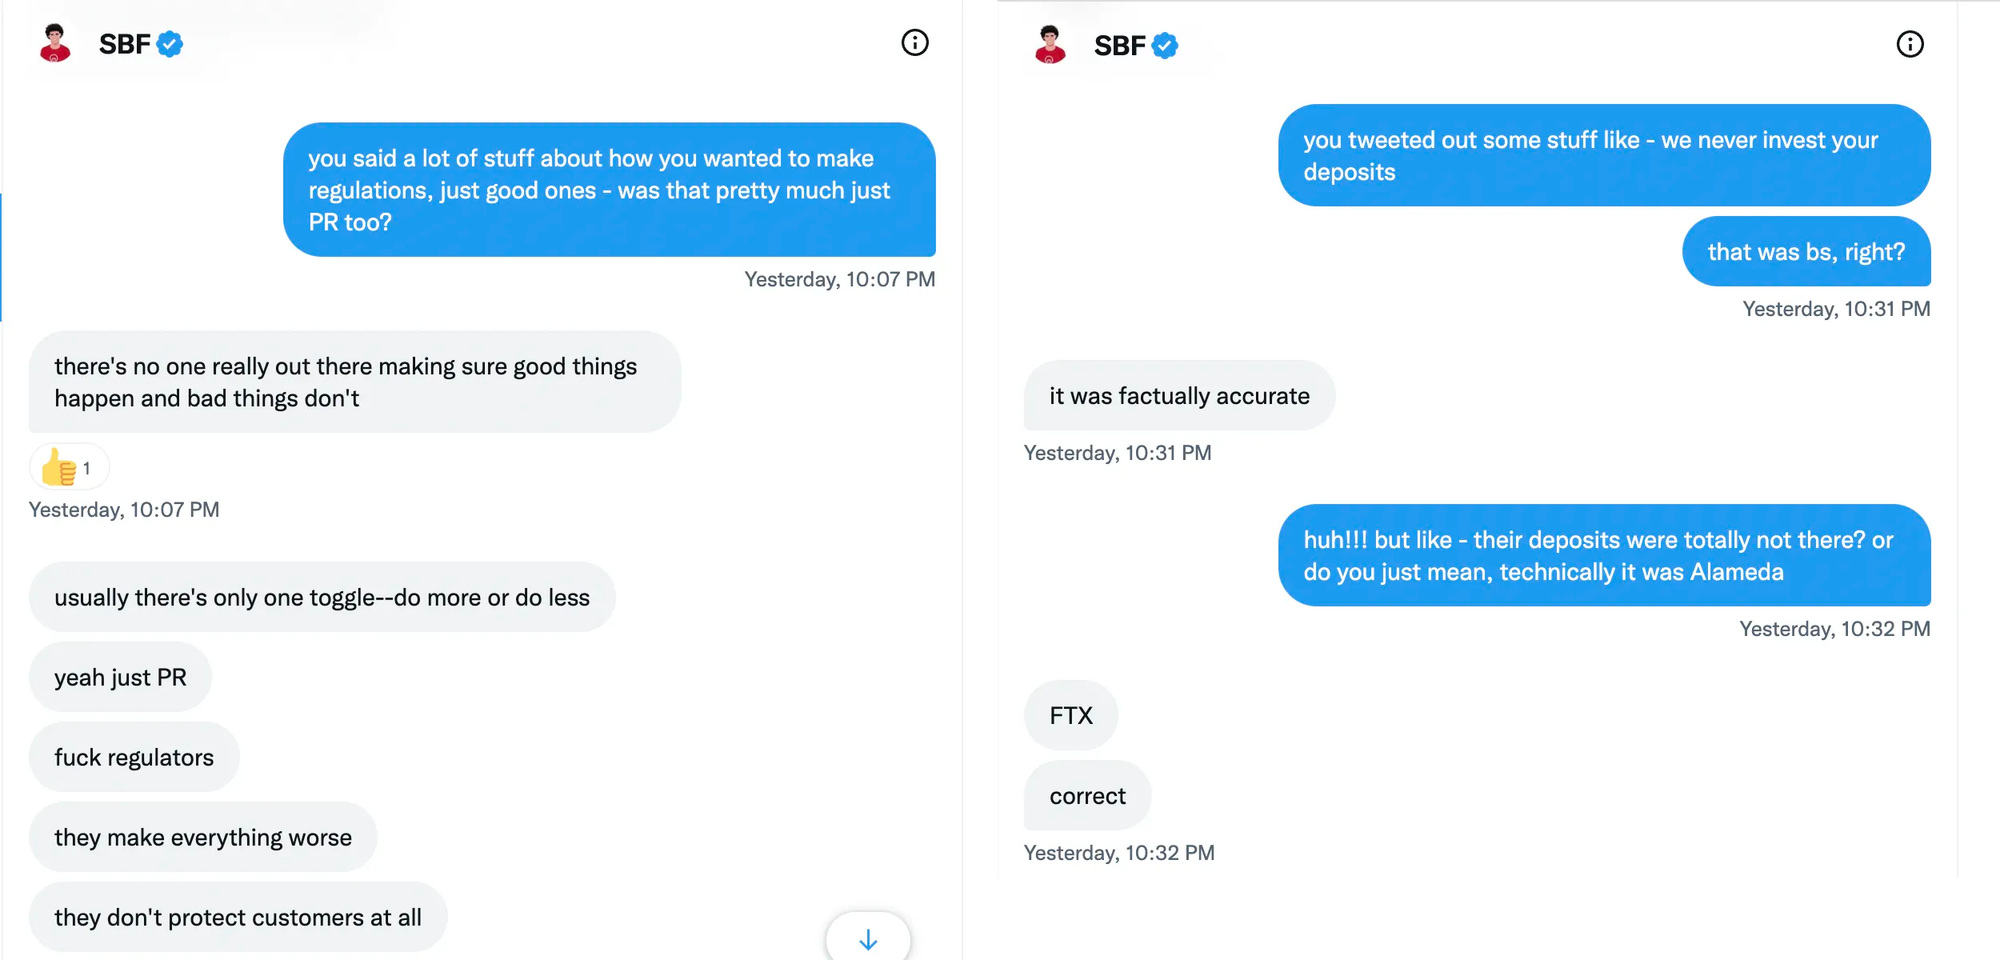 Two screenshots of Twitter DMs, side by side: Kelsey Piper: you said a lot of stuff about how you wanted to make regulations, just good ones - was that pretty much just PR too? Sam Bankman-Fried: there's no one really out there making sure good things happen and bad things don't; usually there's only one toggle—do more or do less. yeah just PR; fuck regulators; they make everything worse; they don't protect customers at all.   Kelsey Piper: you tweeted out some stuff like - we never invest your deposits. that was bs, right? Sam Bankman-Fried: it was factually accurate Kelsey Piper: huh!!! but like - their deposits were totally not there? or do you just mean, technically it was Alameda Sam Bankman-Fried: FTX. correct  